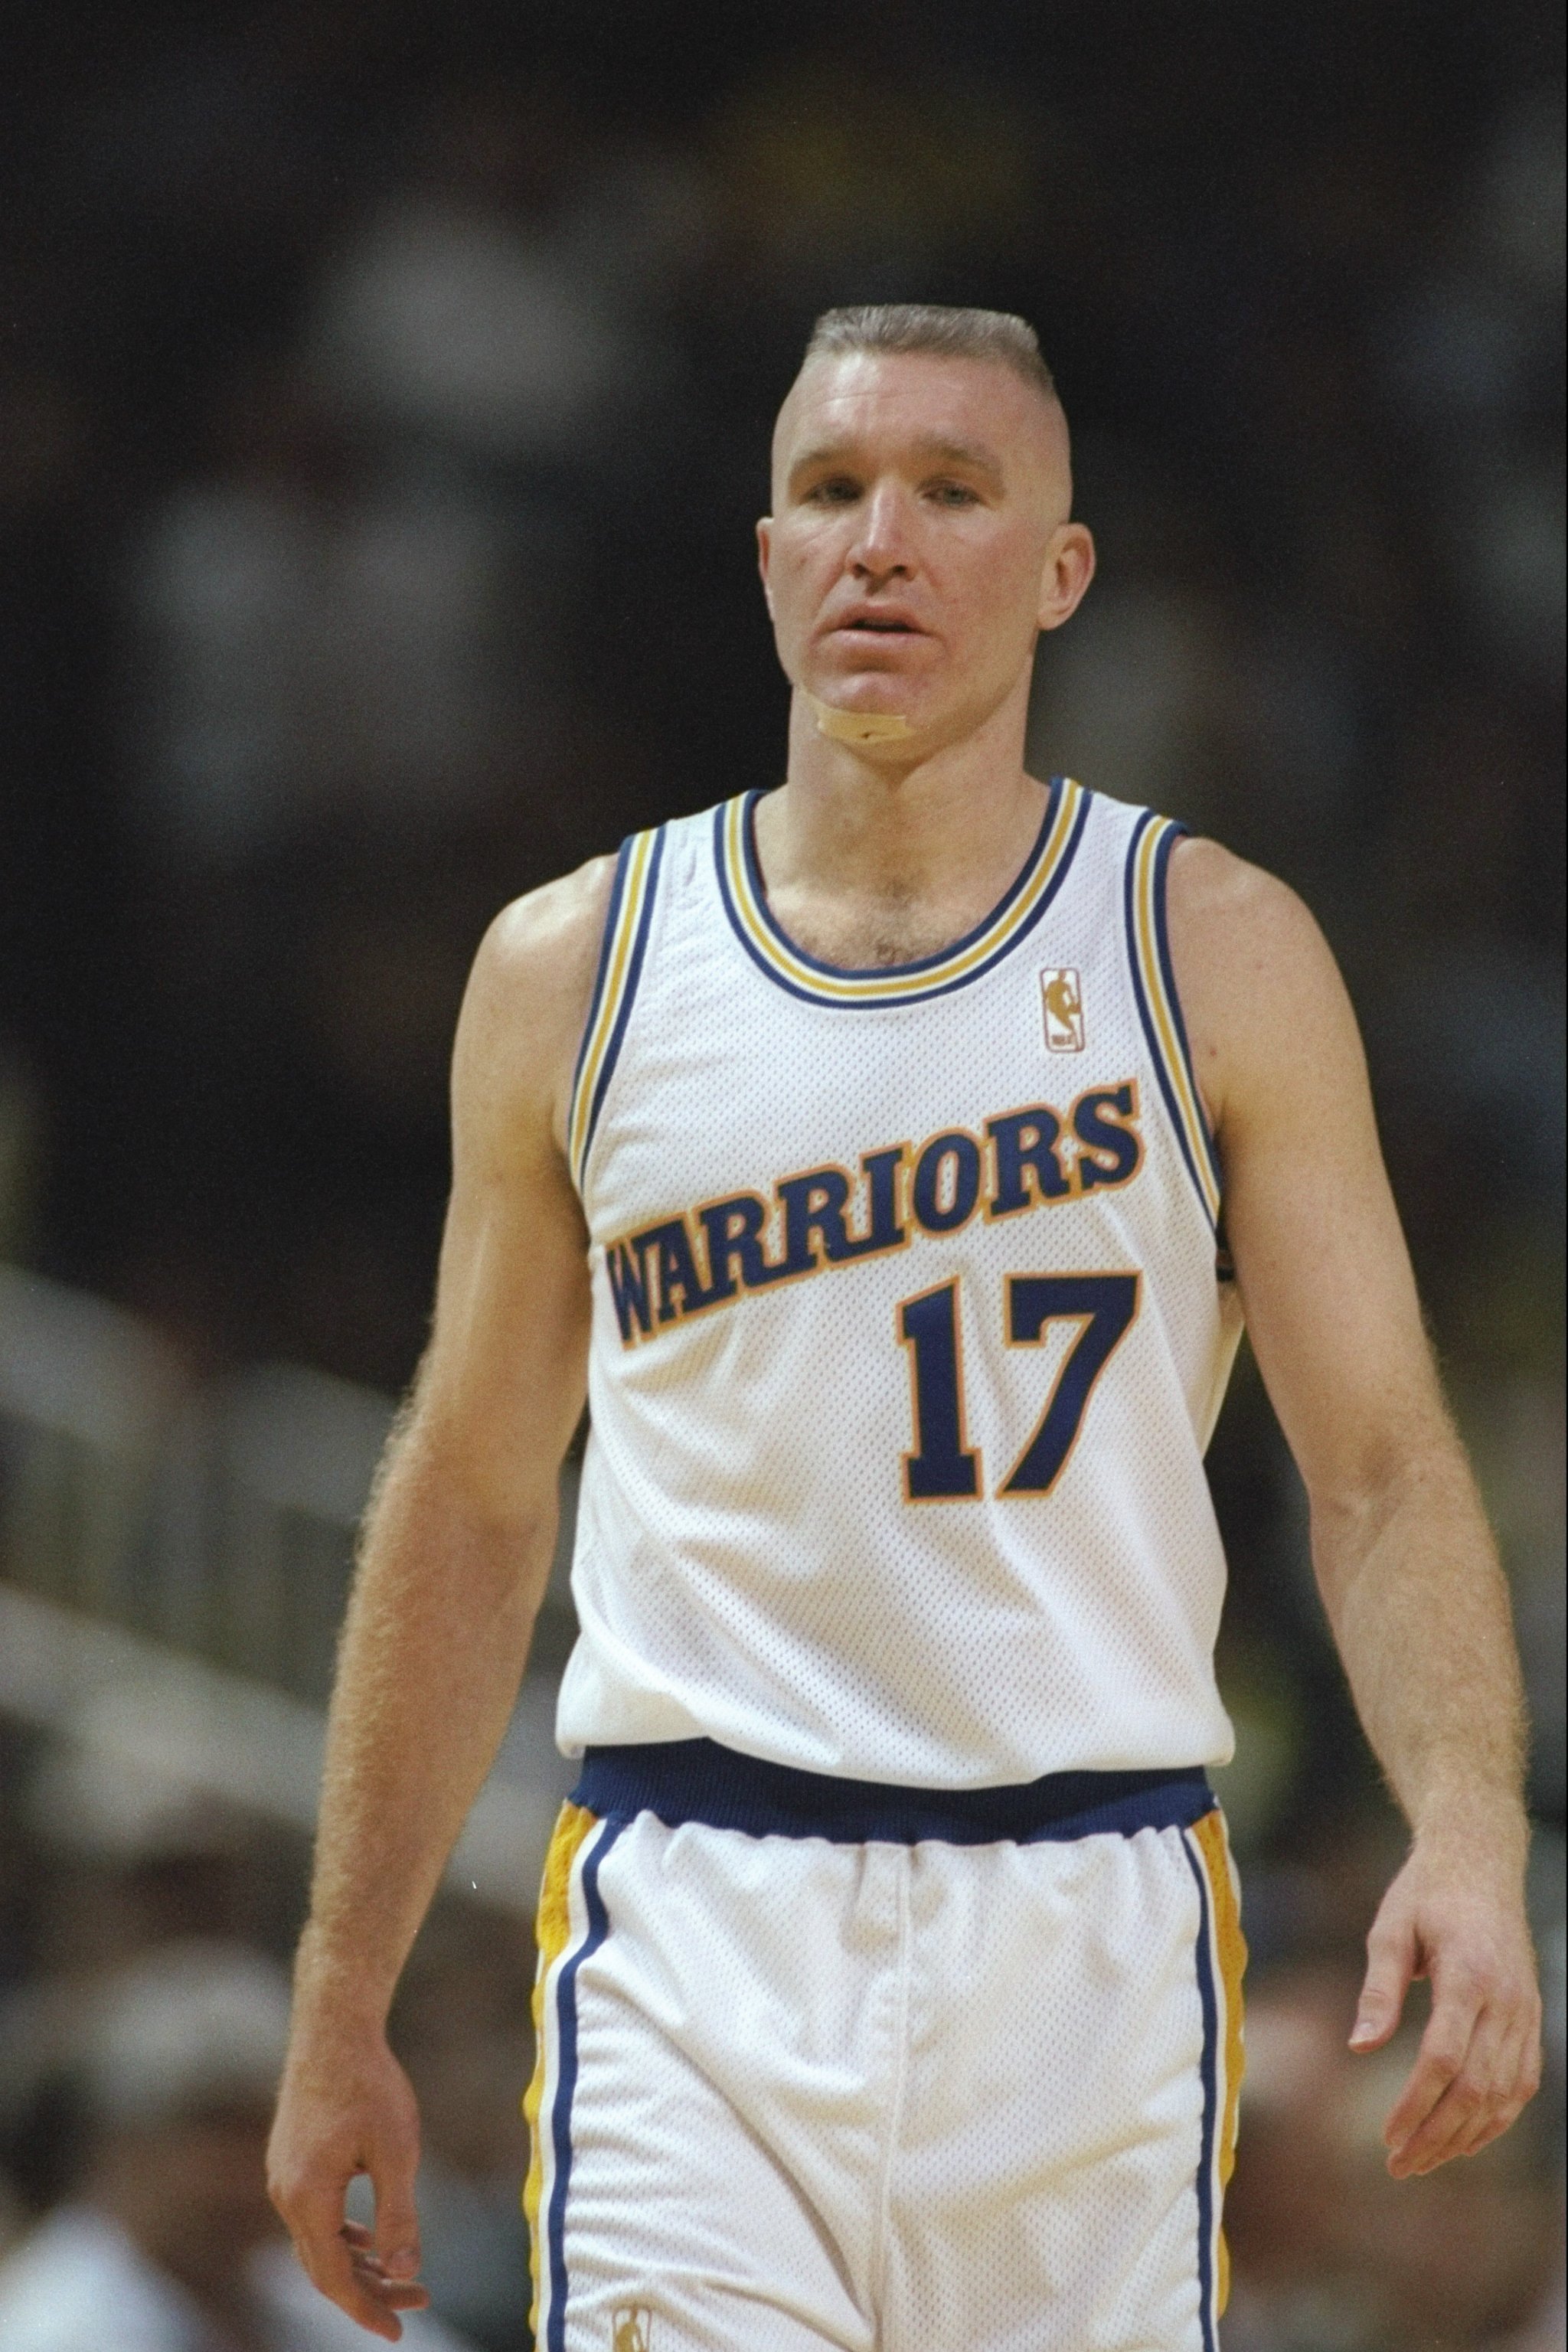 Forward Chris Mullin of the Golden State Warriors stands on the court during a game against the Los Angeles Clippers at the San Jose Arena in San Jose, California. The Clippers won the game 97-85.